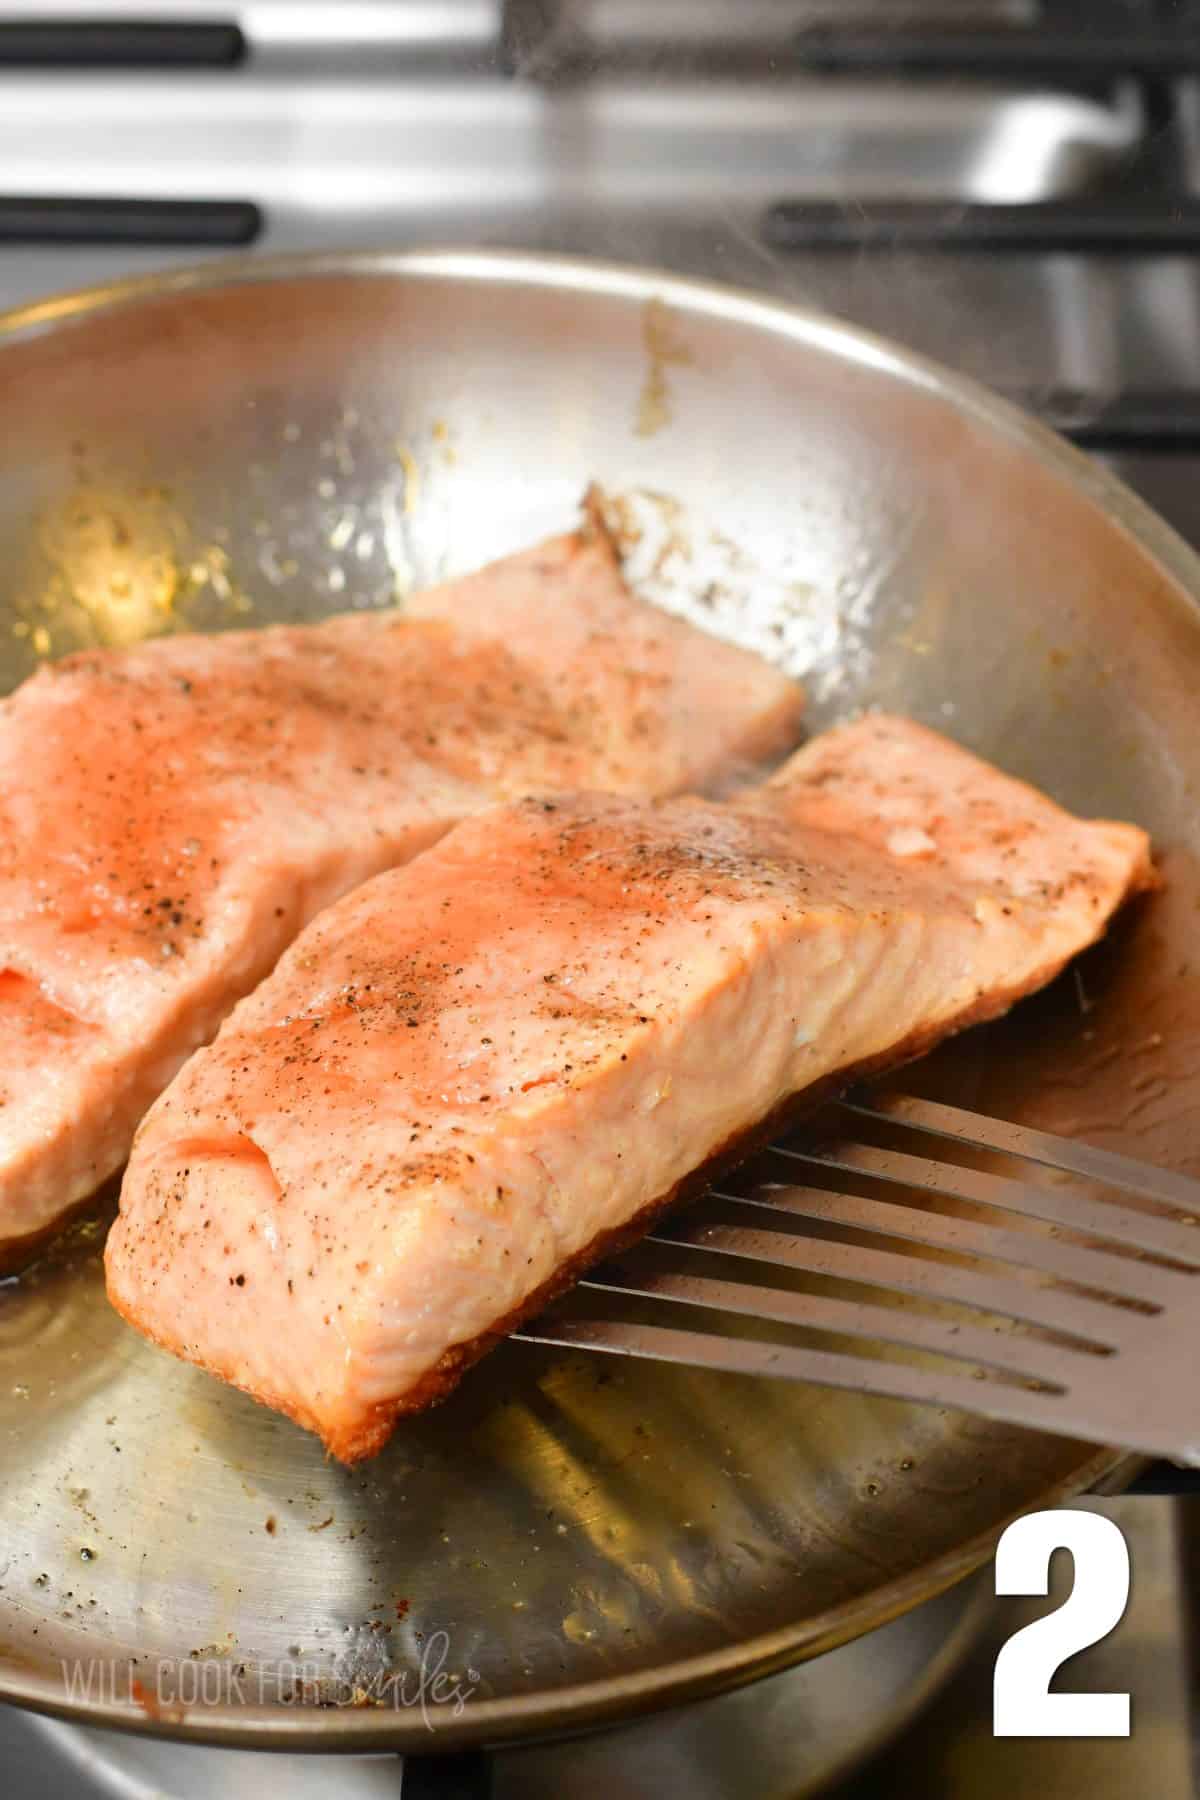 Want crispier skin on your salmon? Of course you do. Want to nail